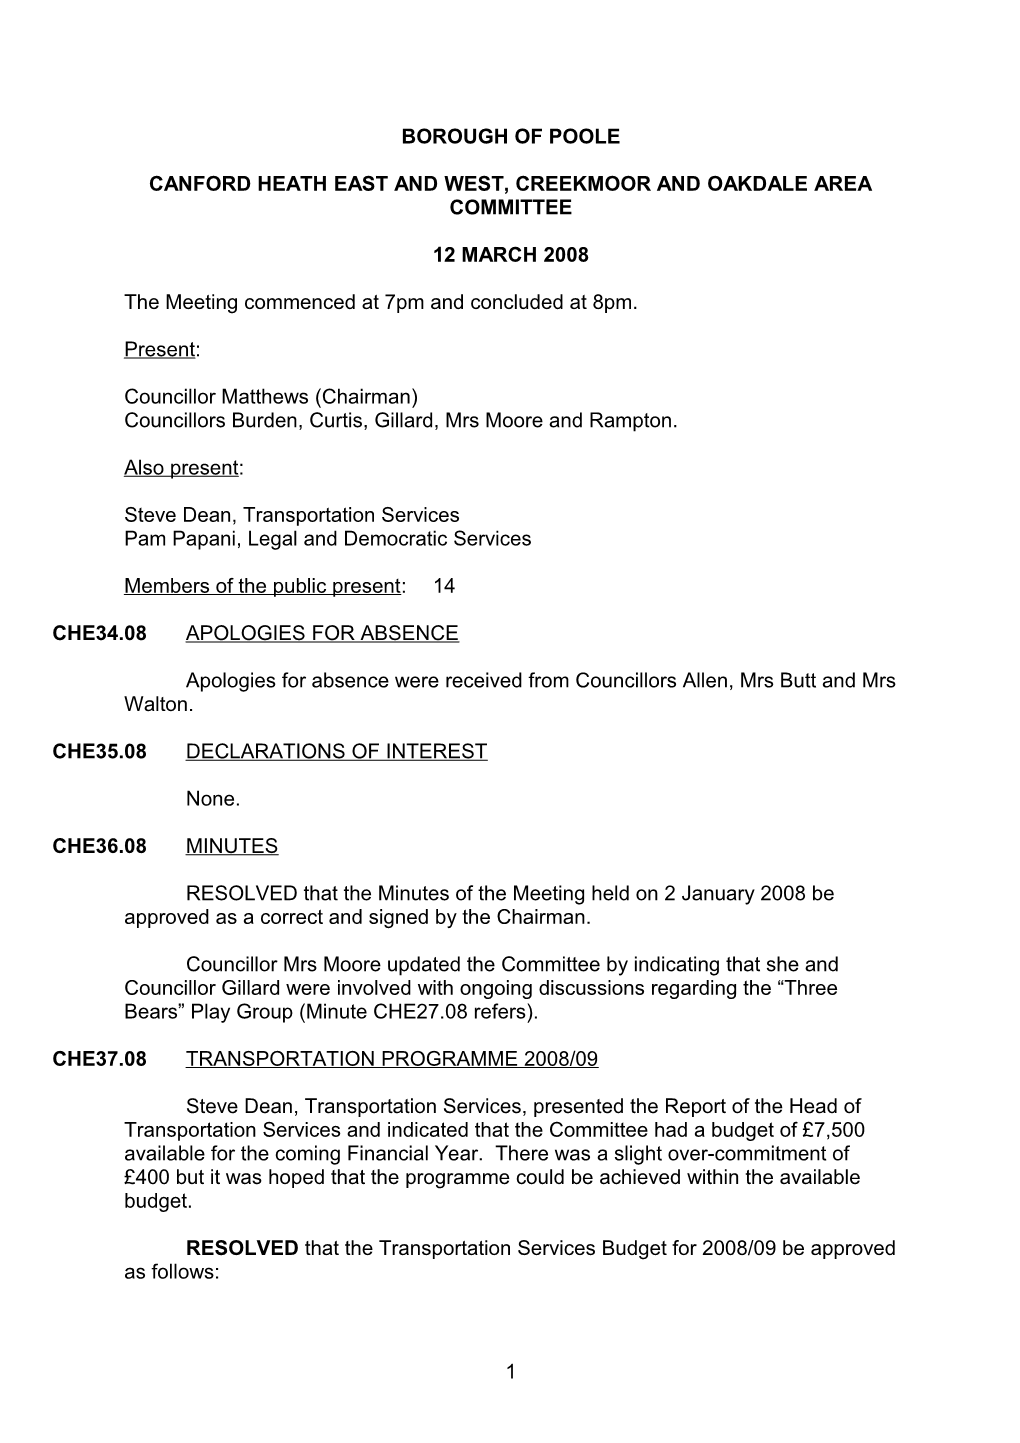 Minutes - CANFORD HEATH EAST and WEST, CREEKMOOR and OAKDALE AREA COMMITTEE - 12 March 2008